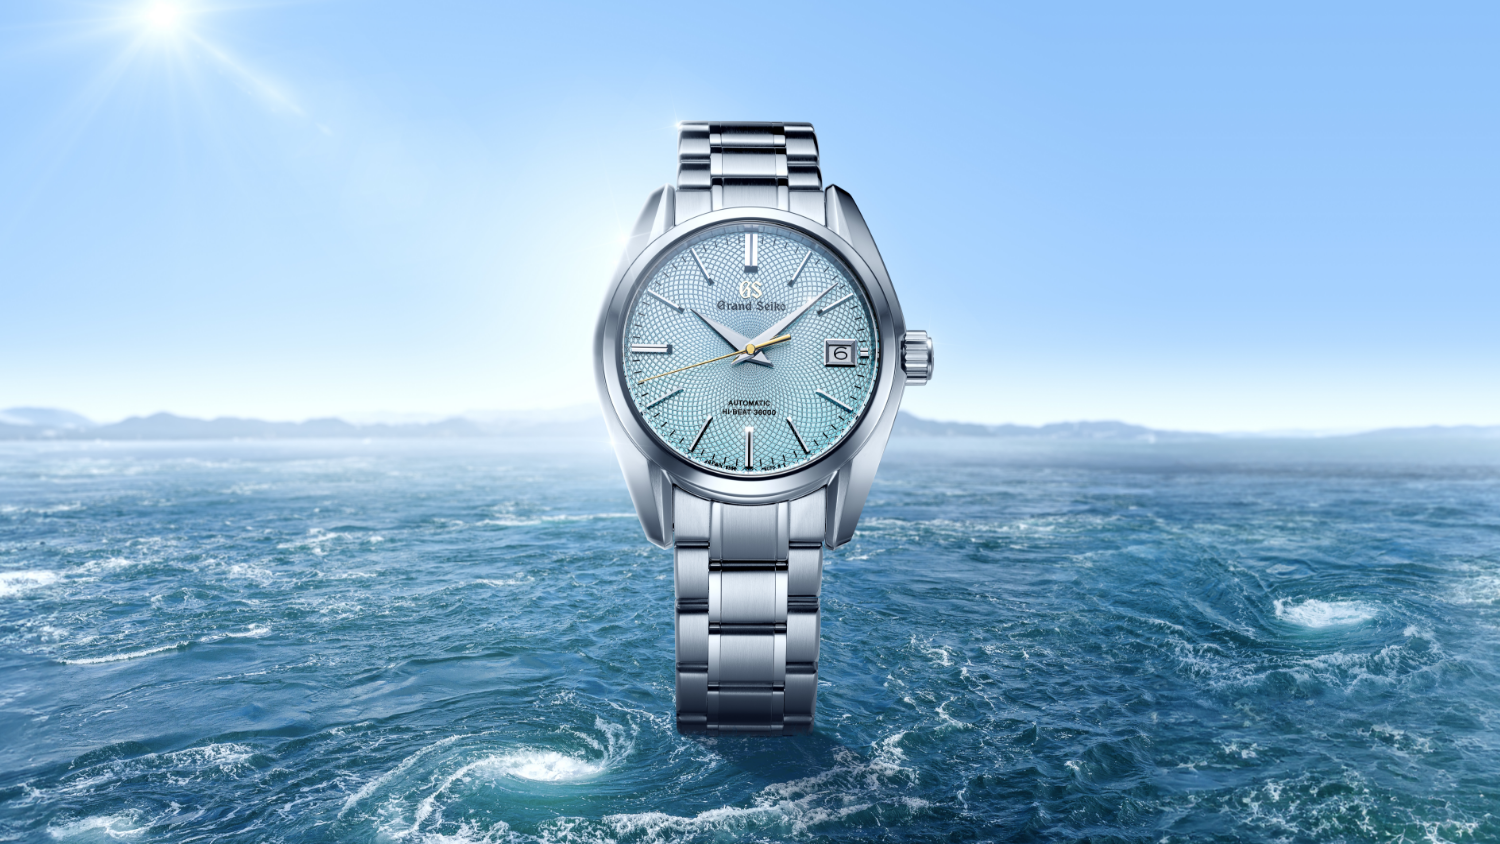 Grand Seiko Launches Oceania Exclusive Edition Introducing the Grand ...